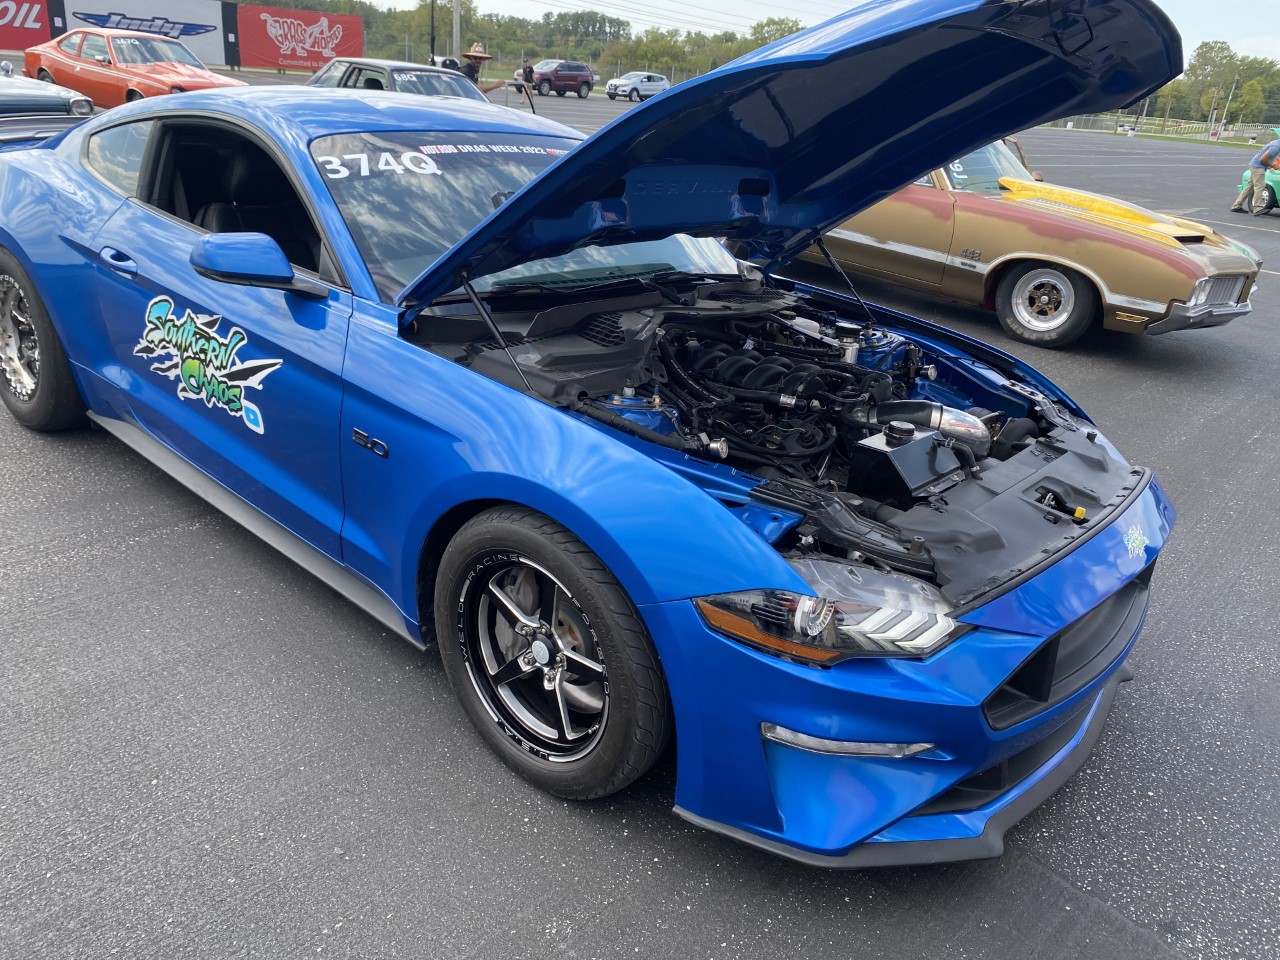 Hot Rod Drag Week 2022 makes stop in Indianapolis